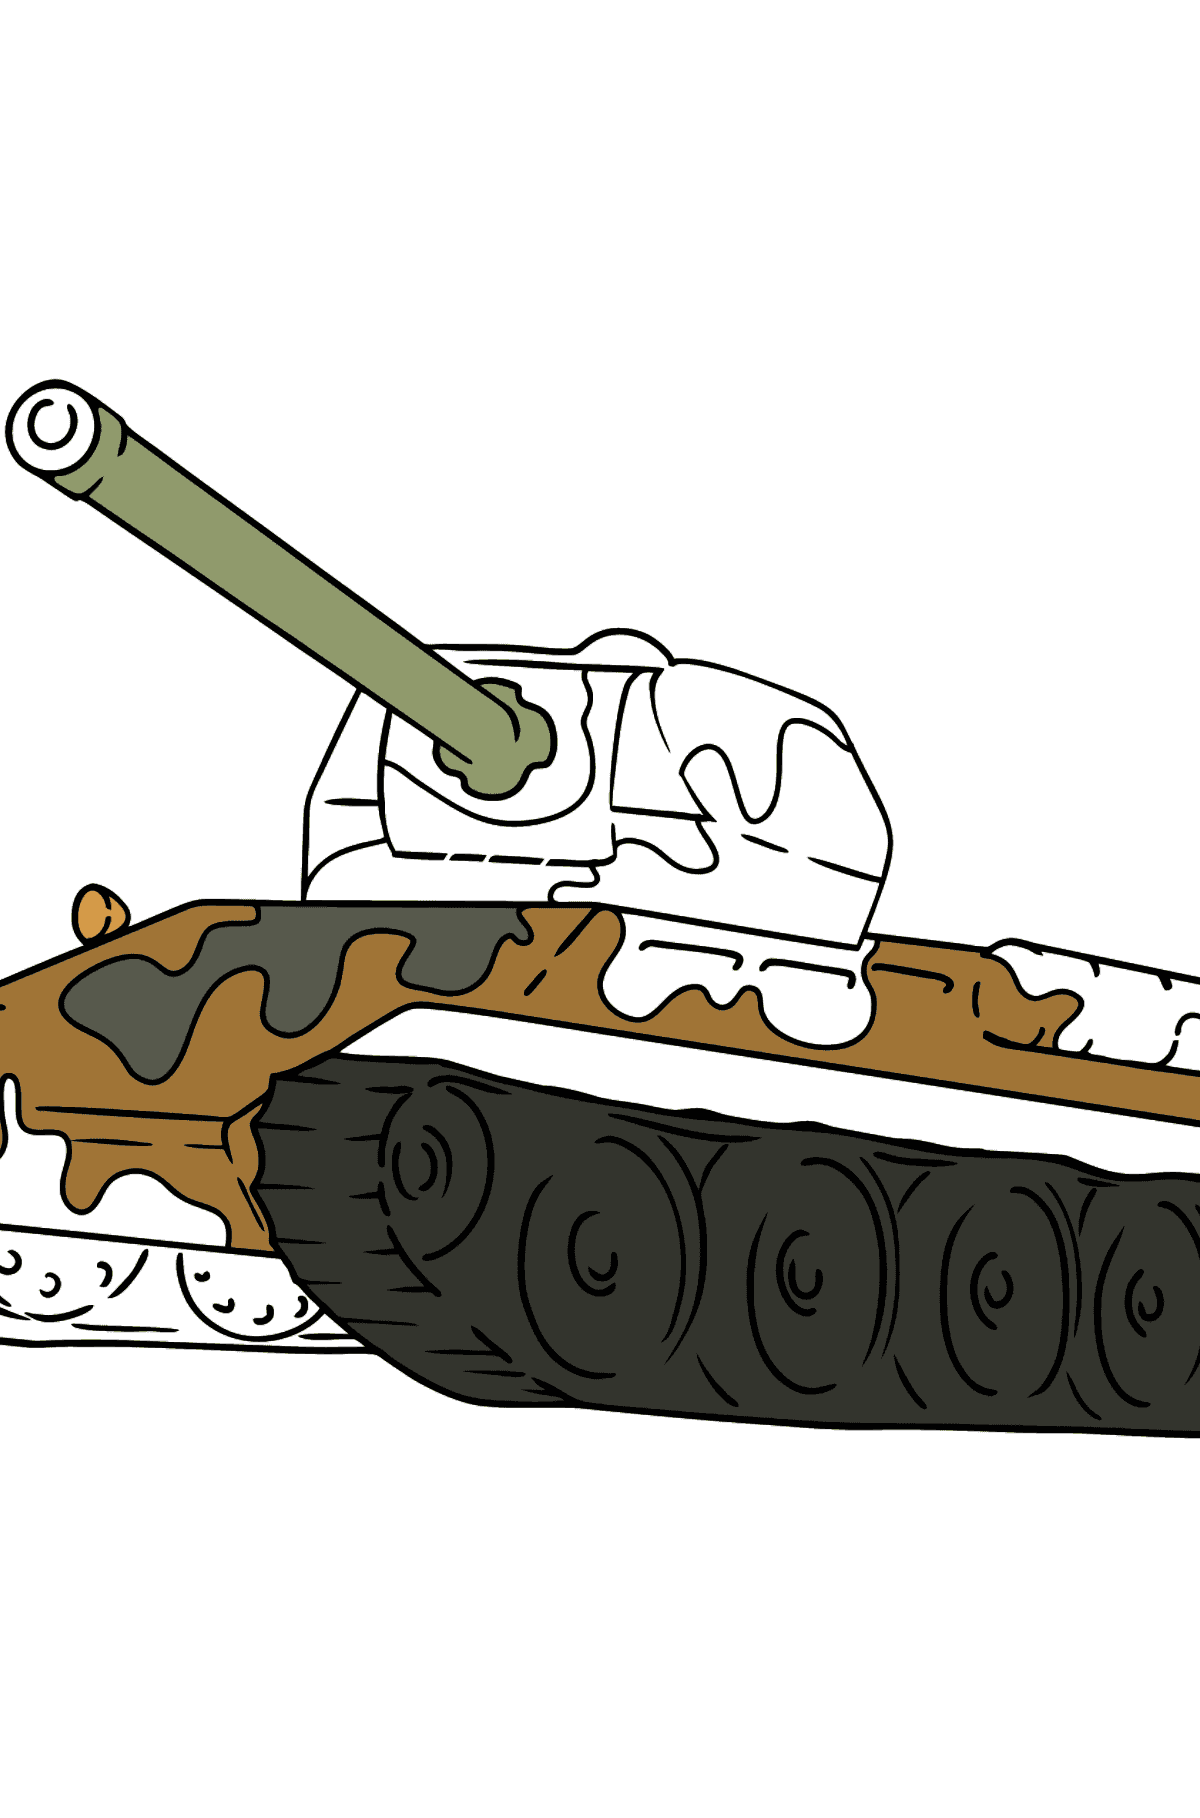 Tank with Anti-Aircraft Gun coloring page - Coloring Pages for Kids